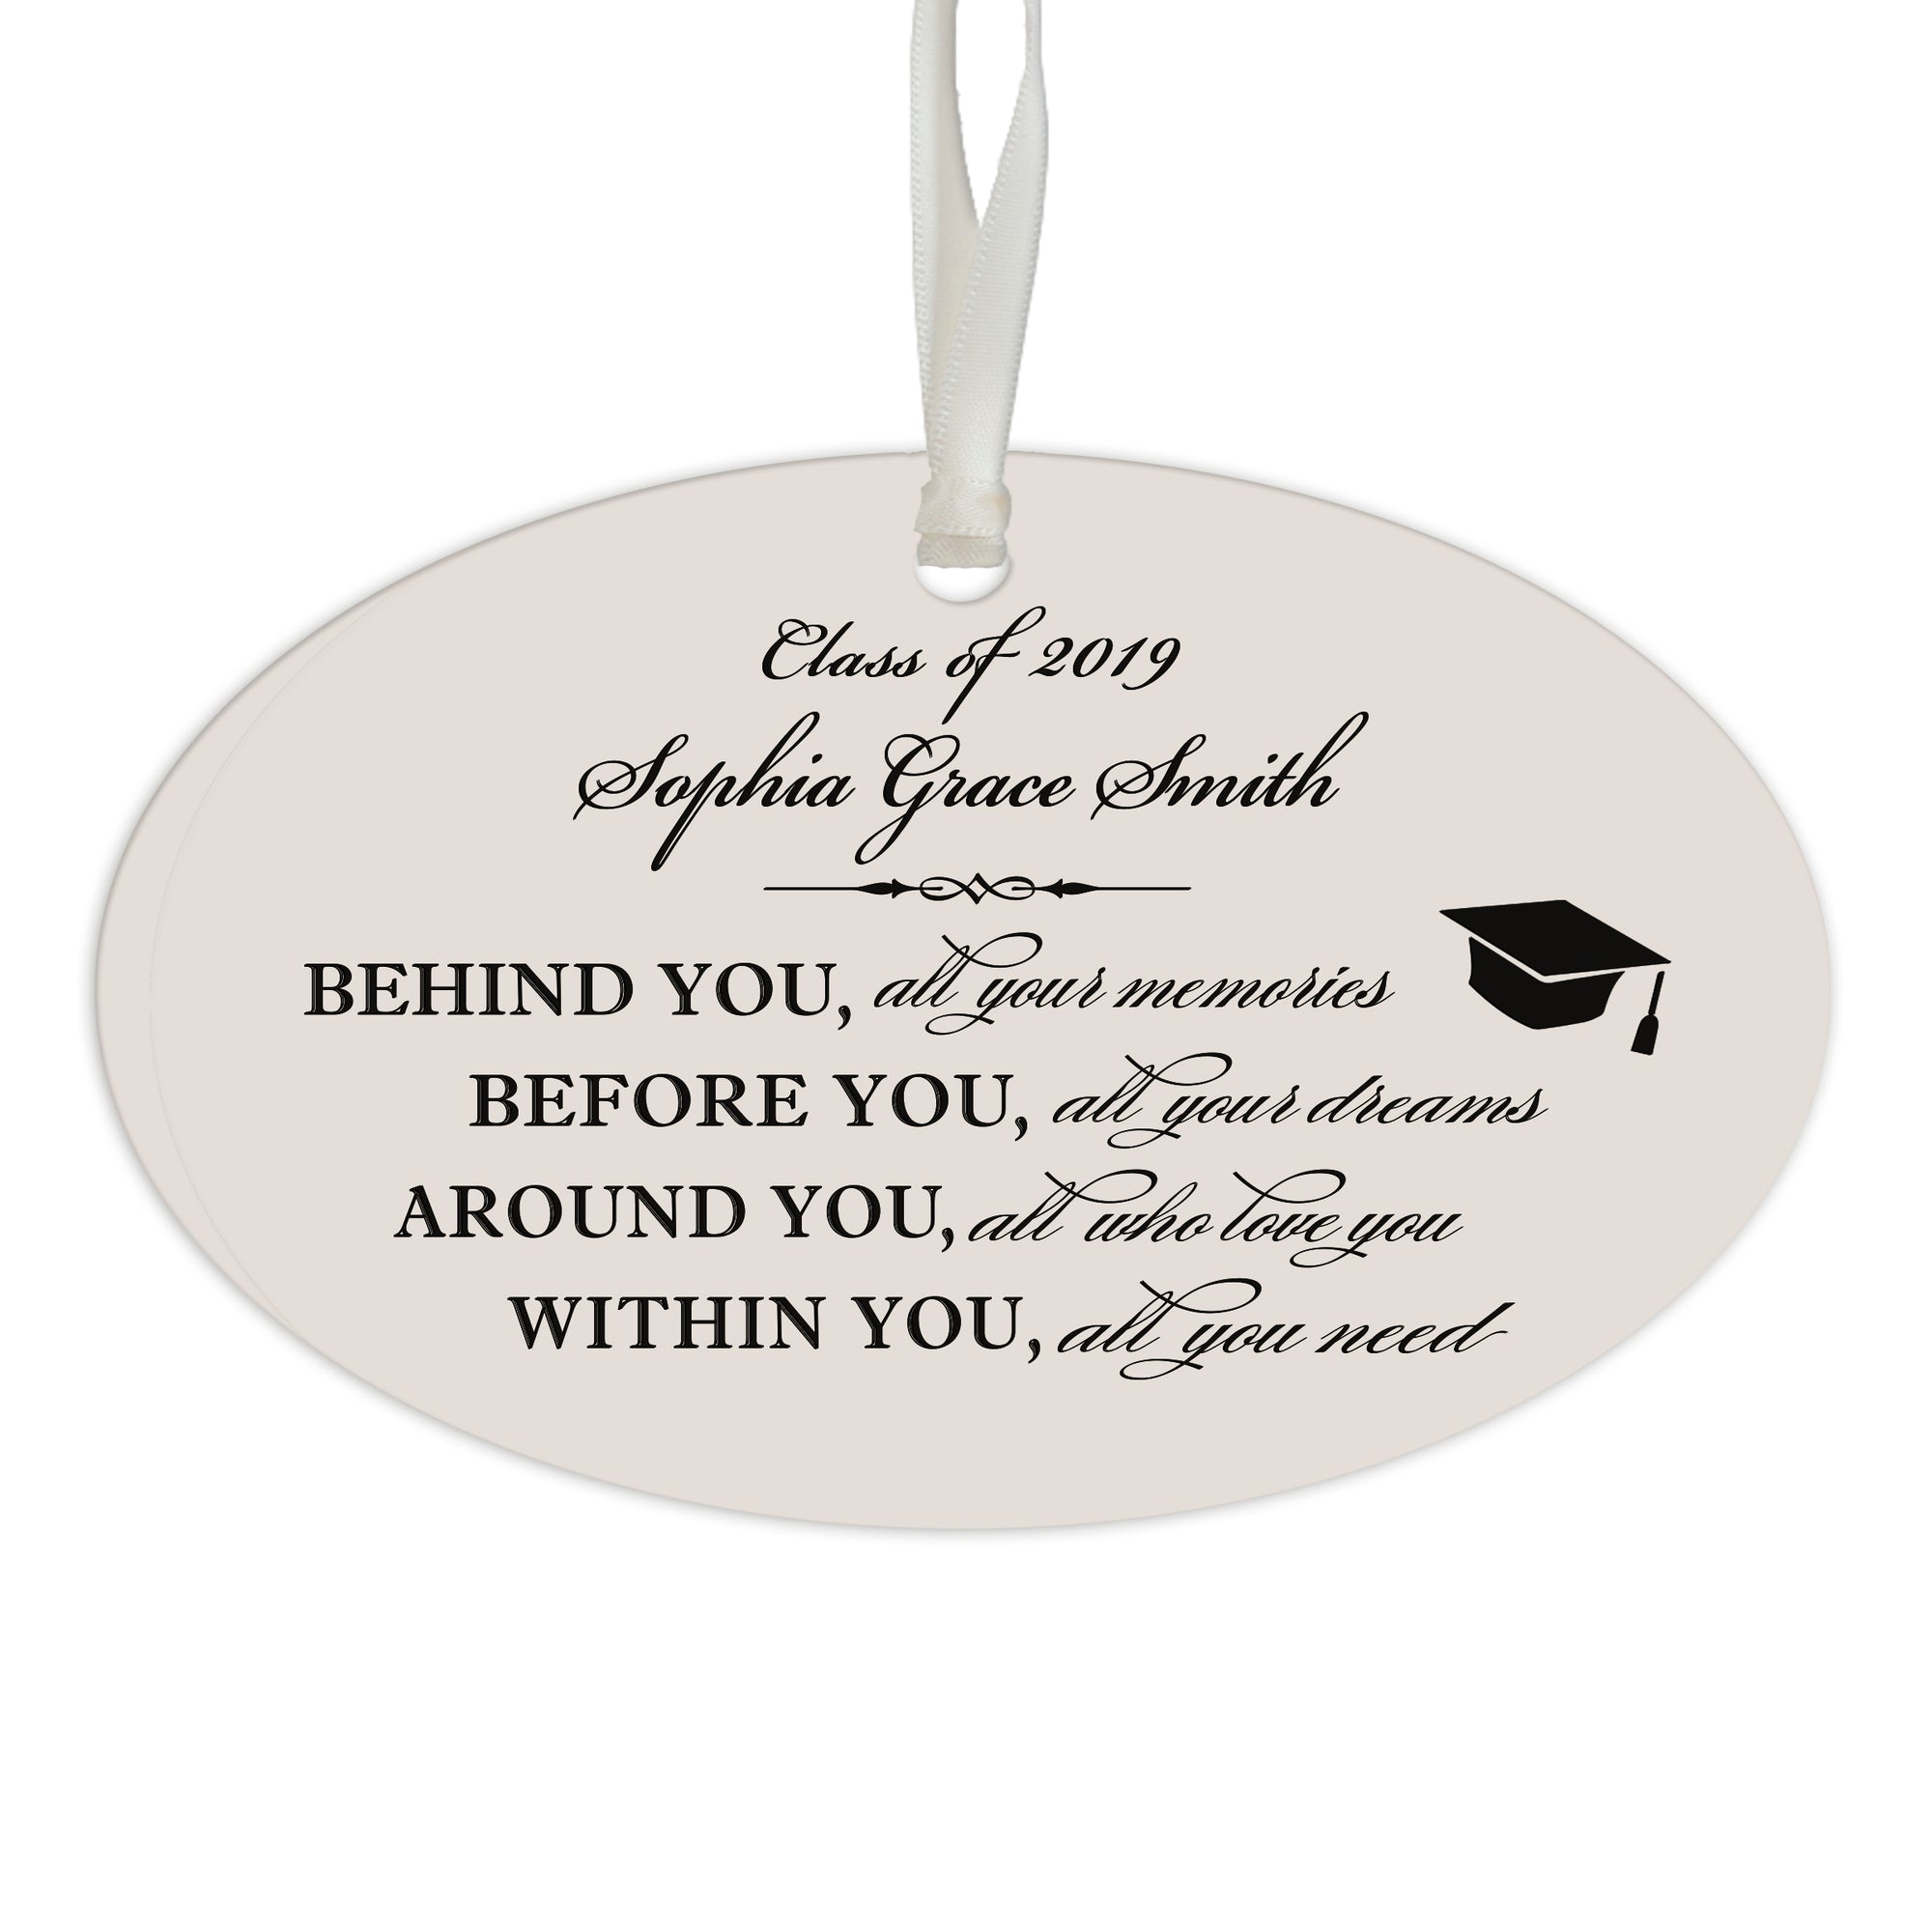 Personalized Graduation Ornament Gift for Graduate - Behind You